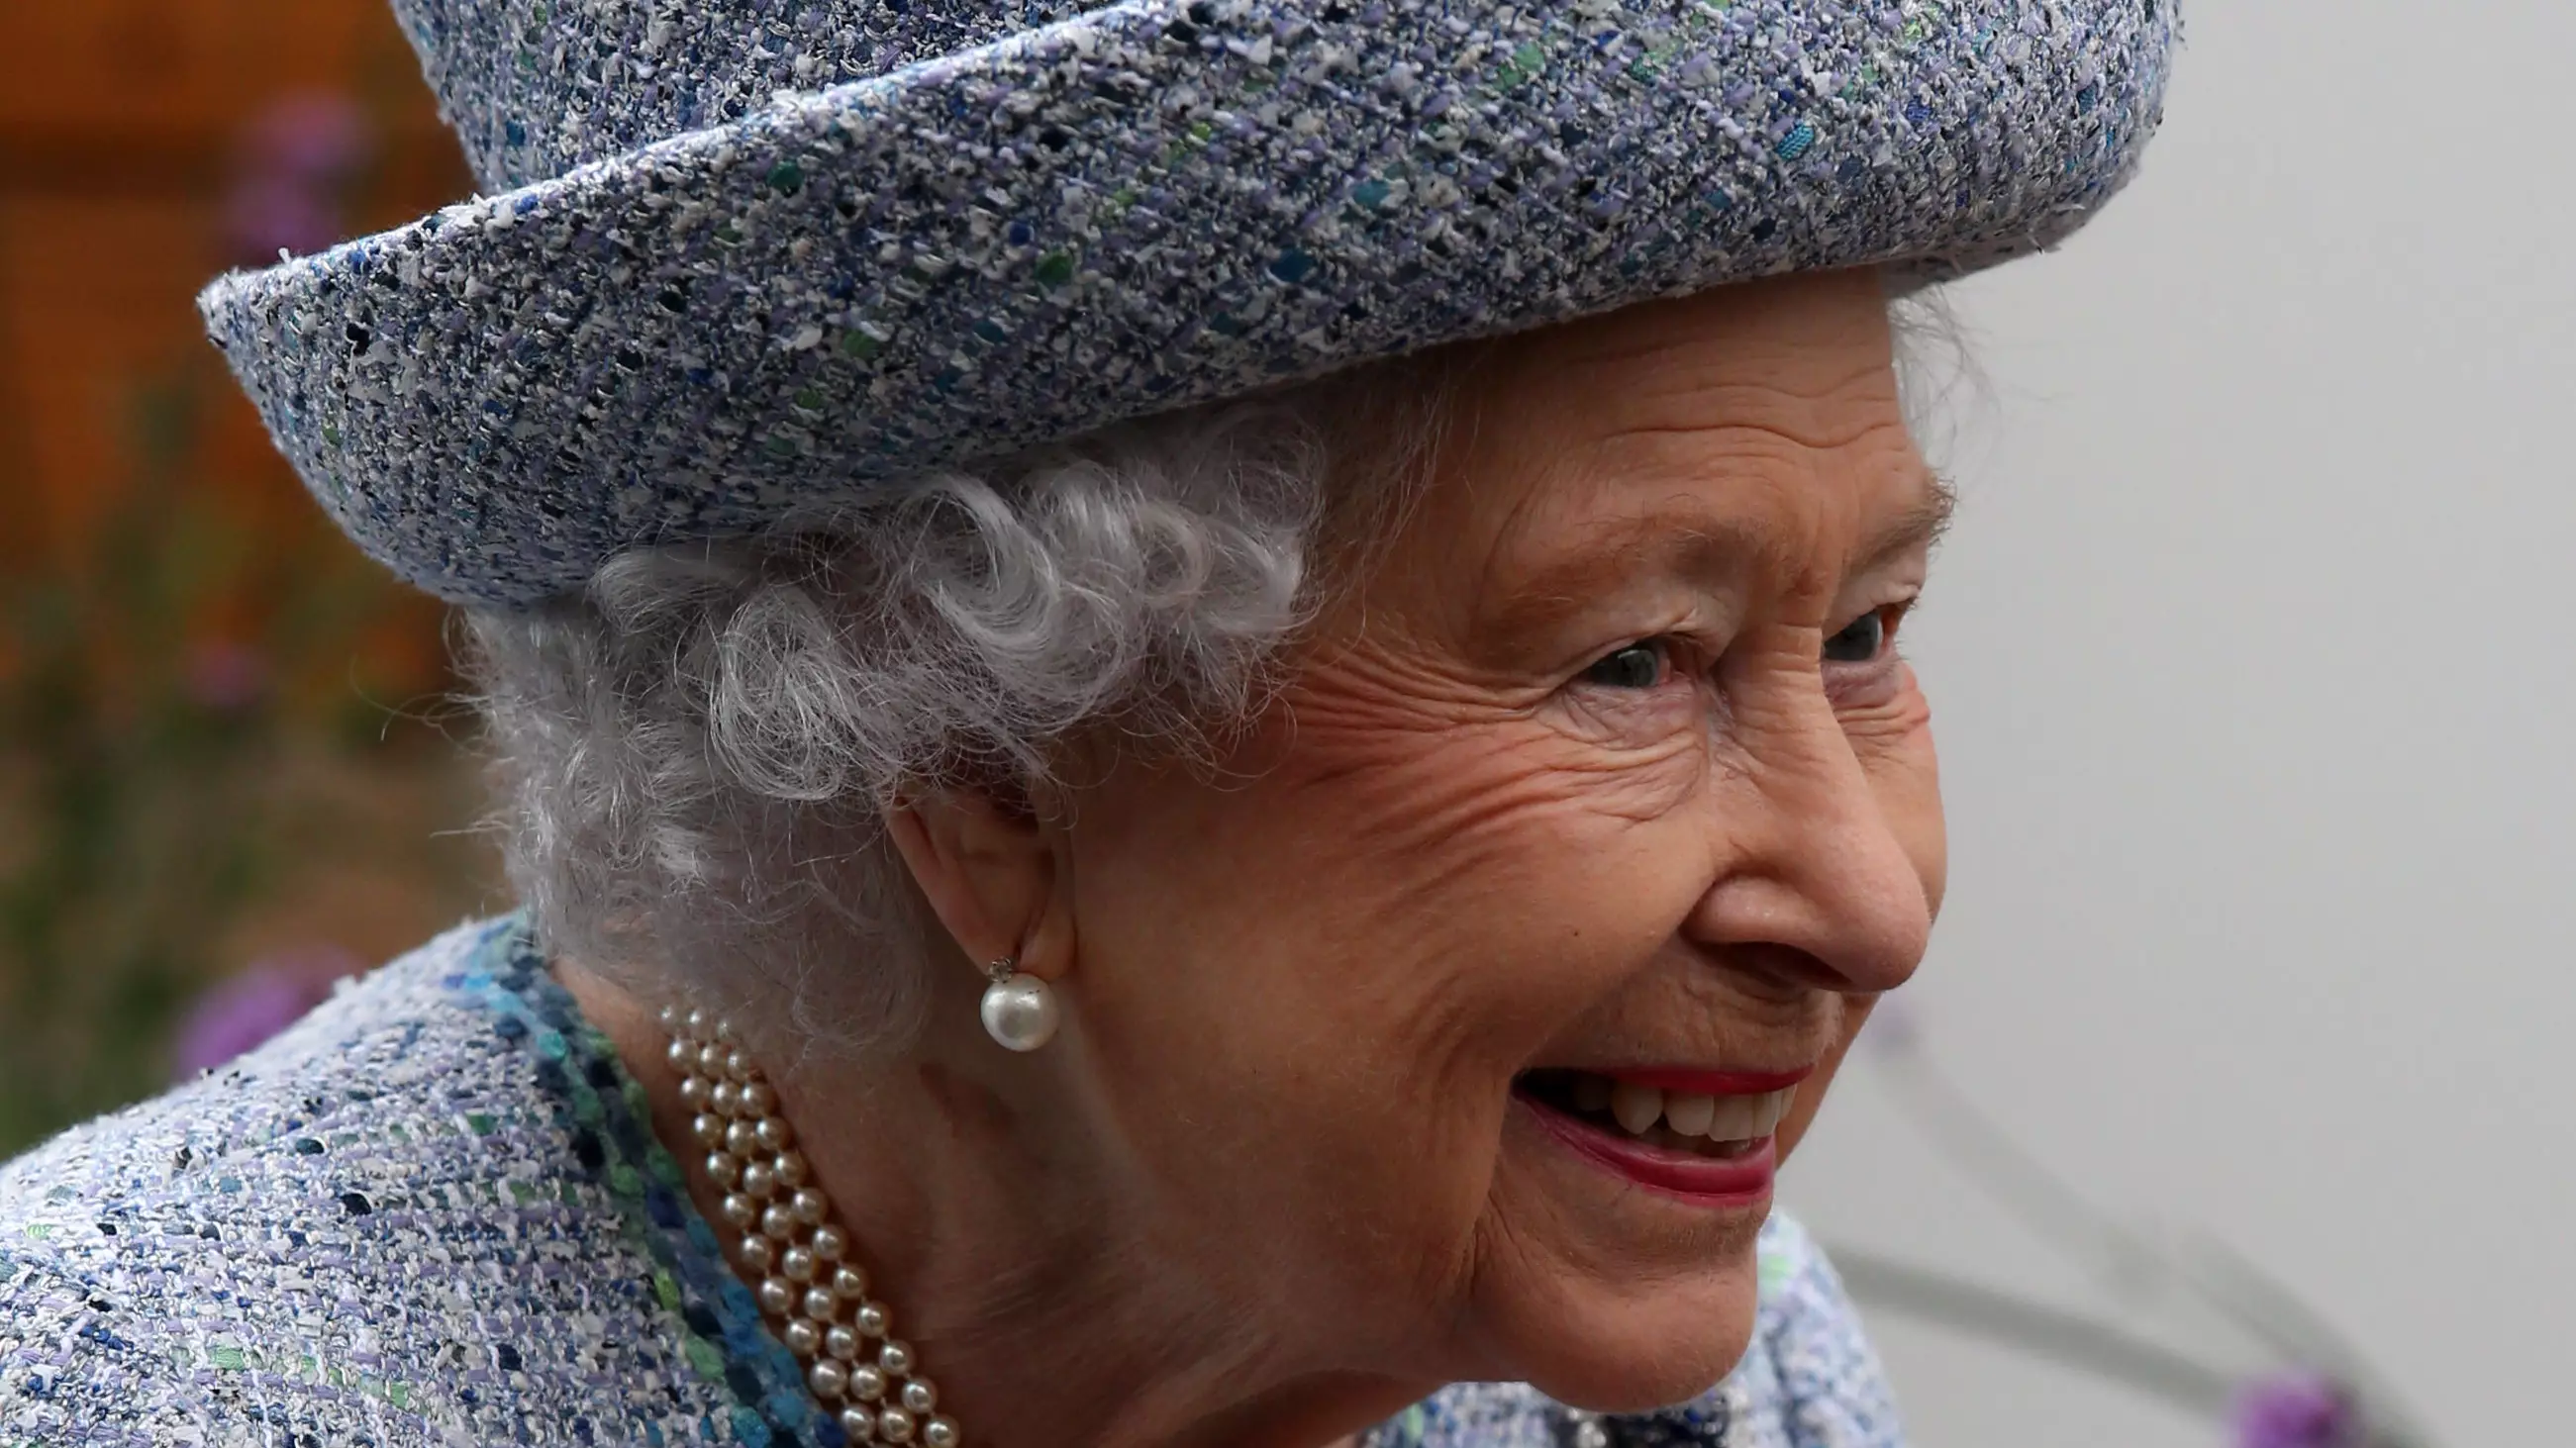 The Royal Family Is Worth £67.5 Billion, According To New Report